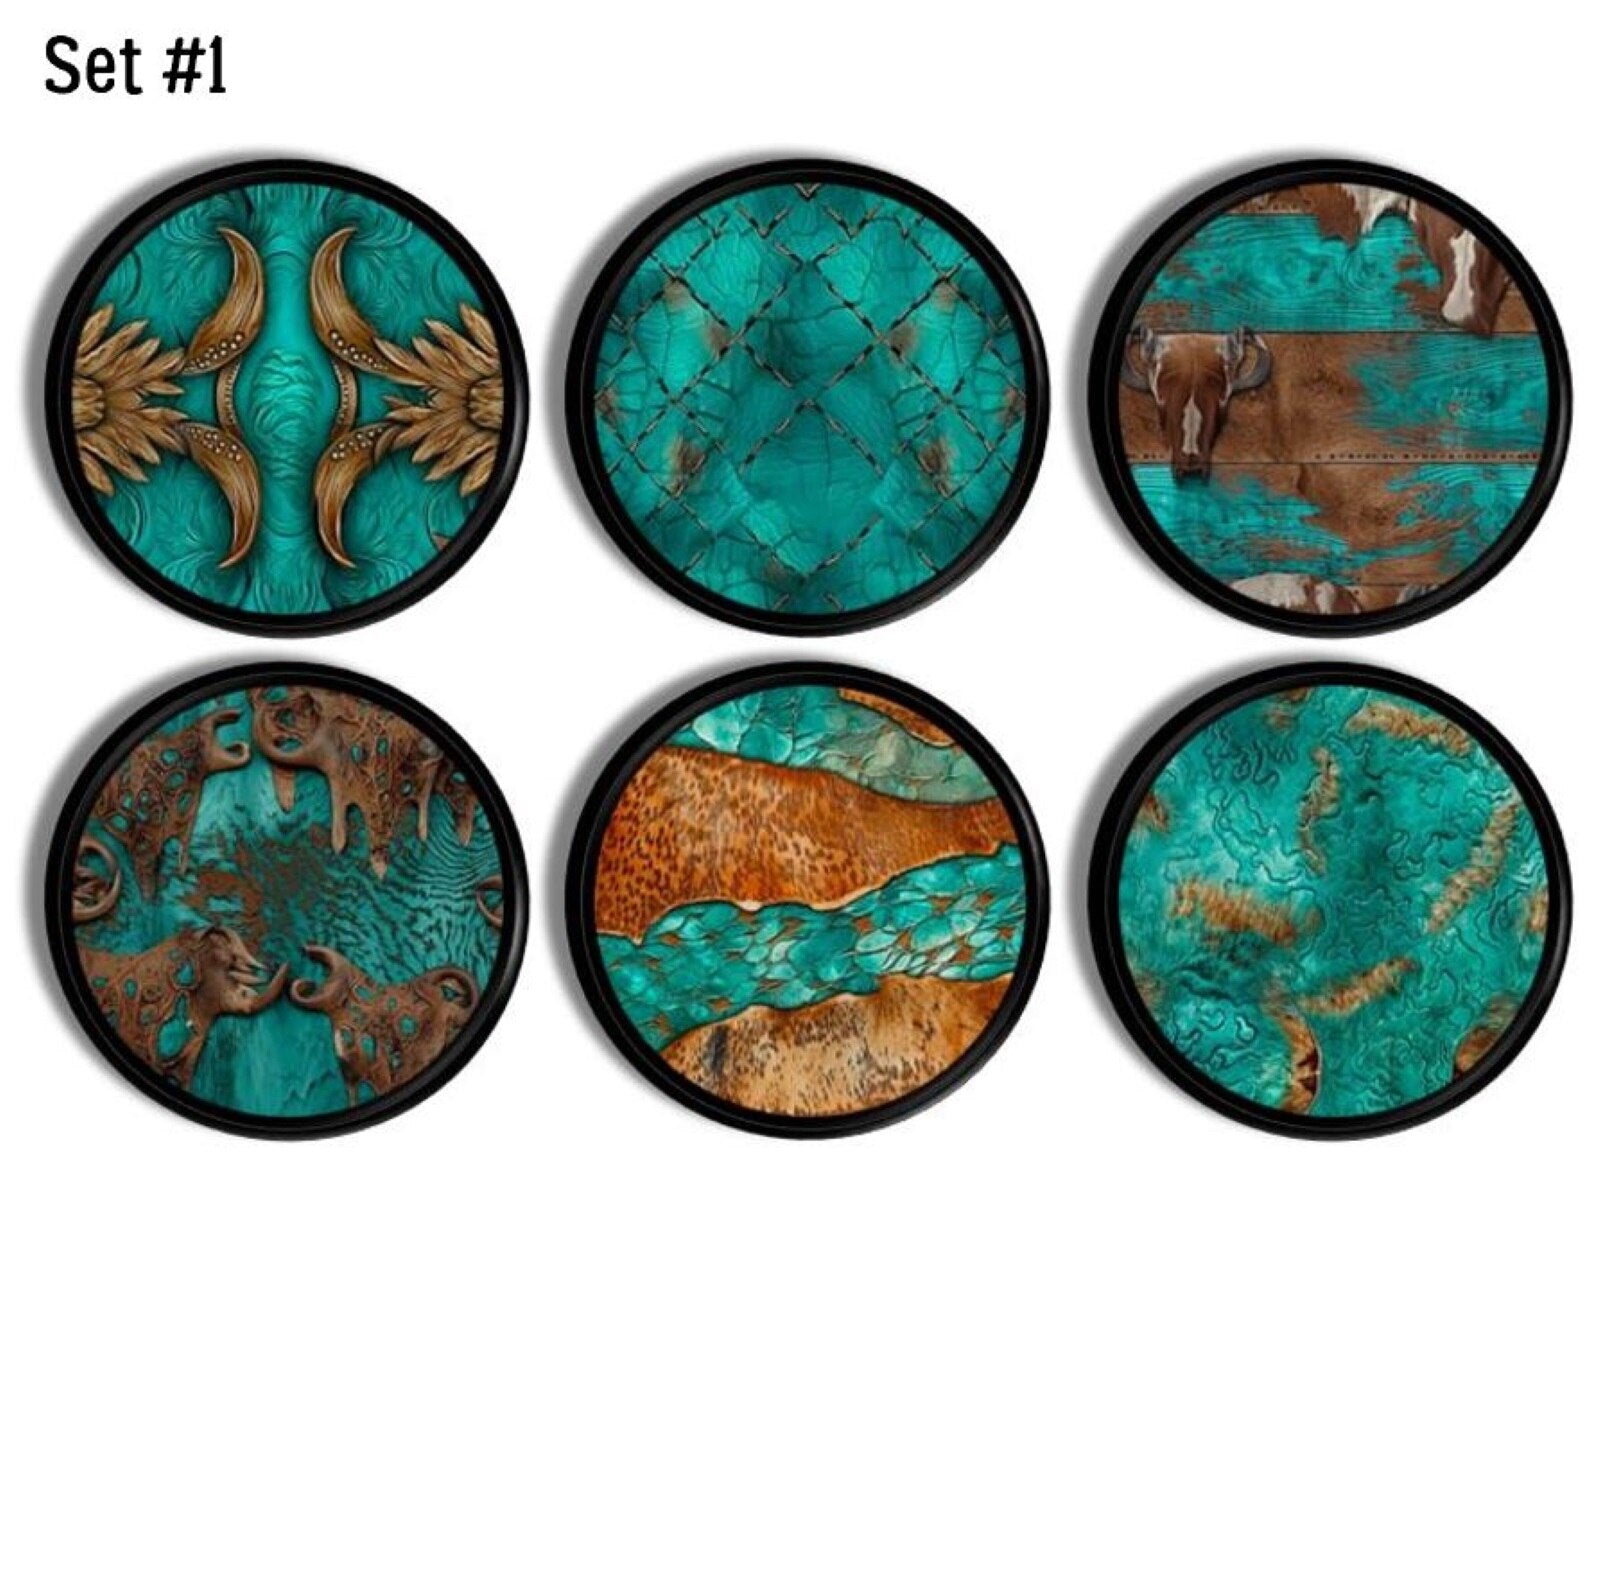 Black furniture drawer pull hardware in a rustic turquoise and brown western cowhide theme. 